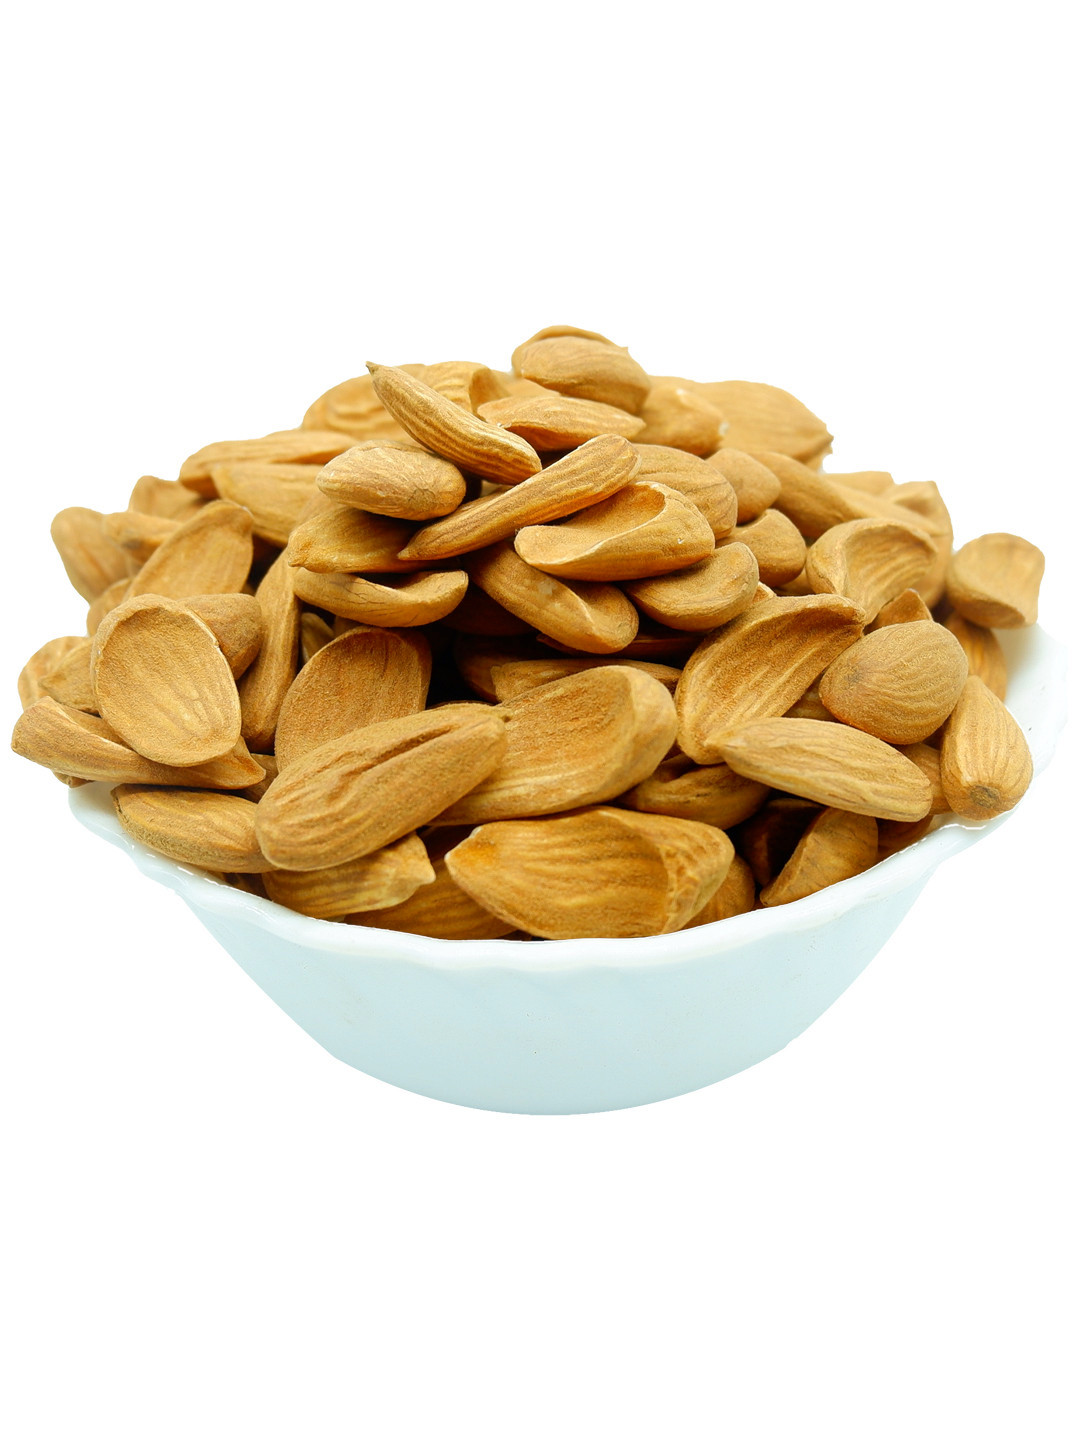 Buy, sell and export Mamra almonds